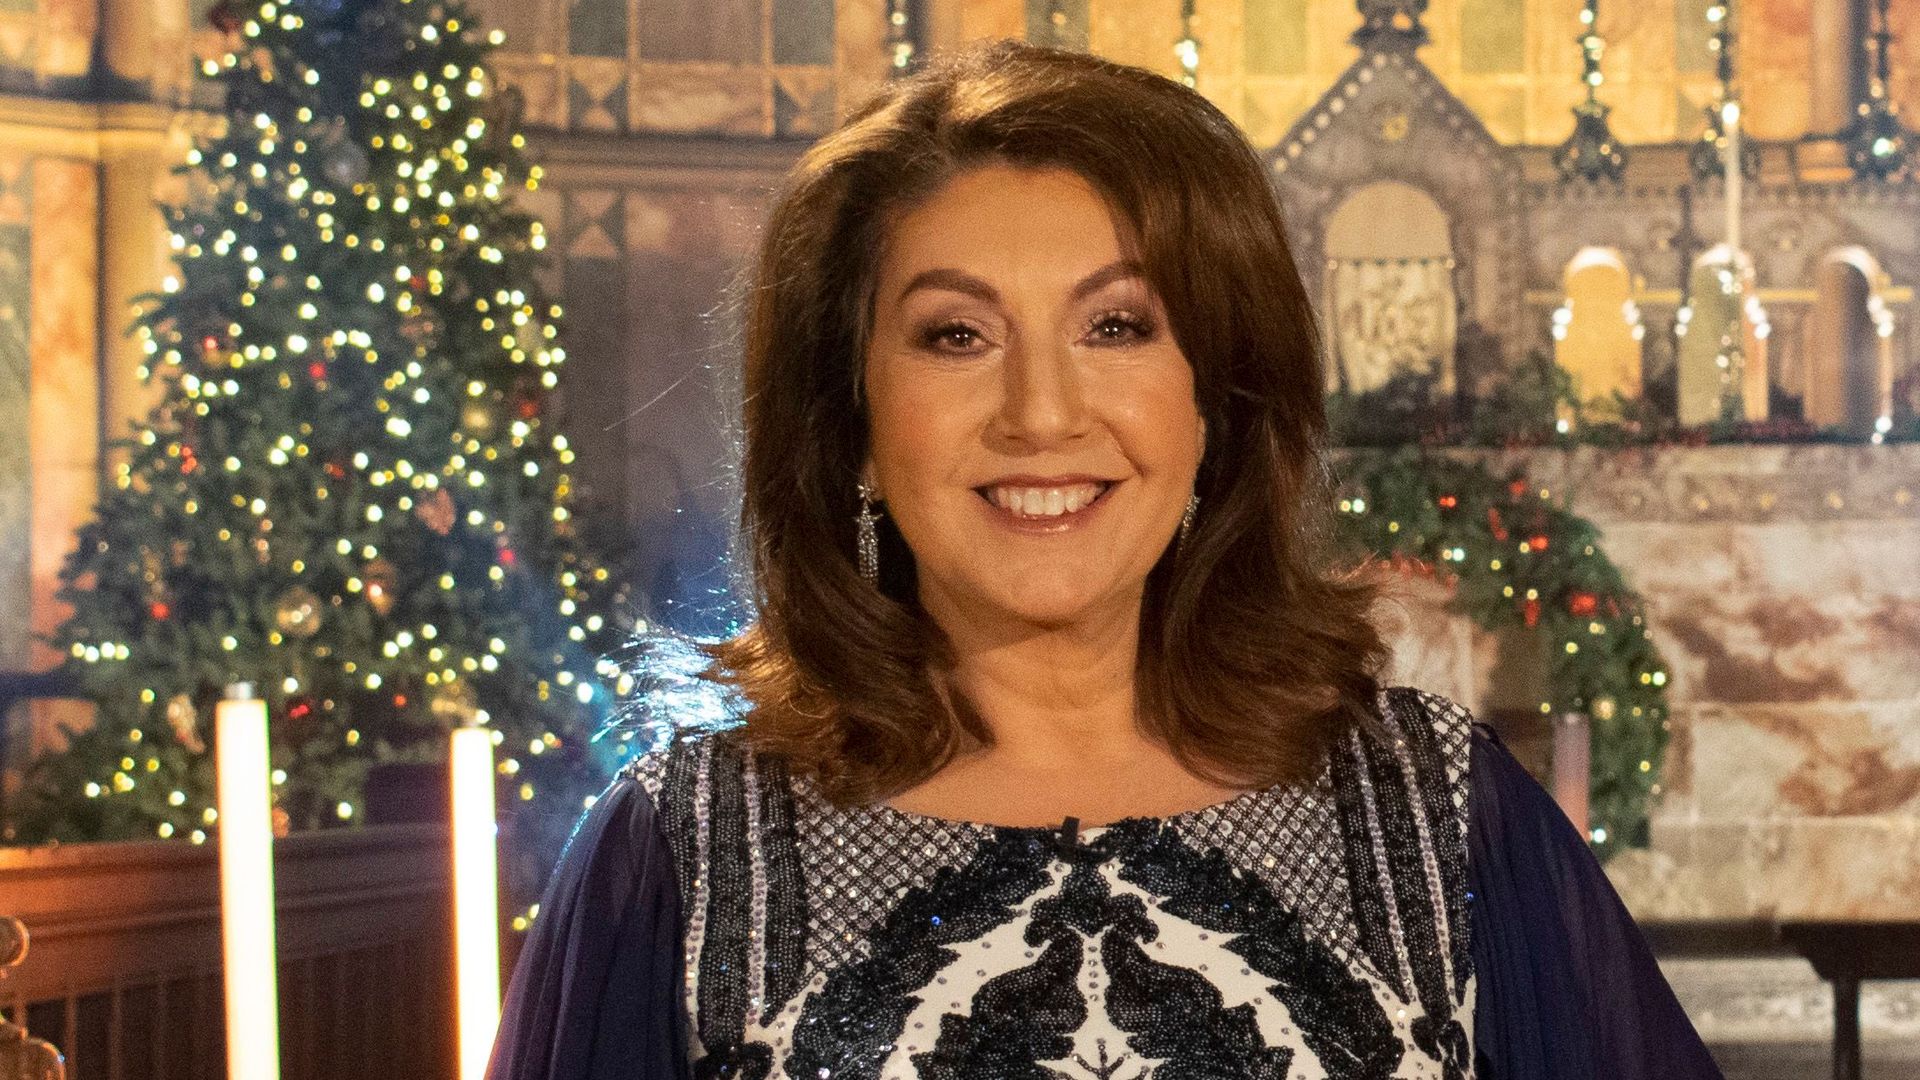 Jane McDonald in sequin dress in front of Christmas trees